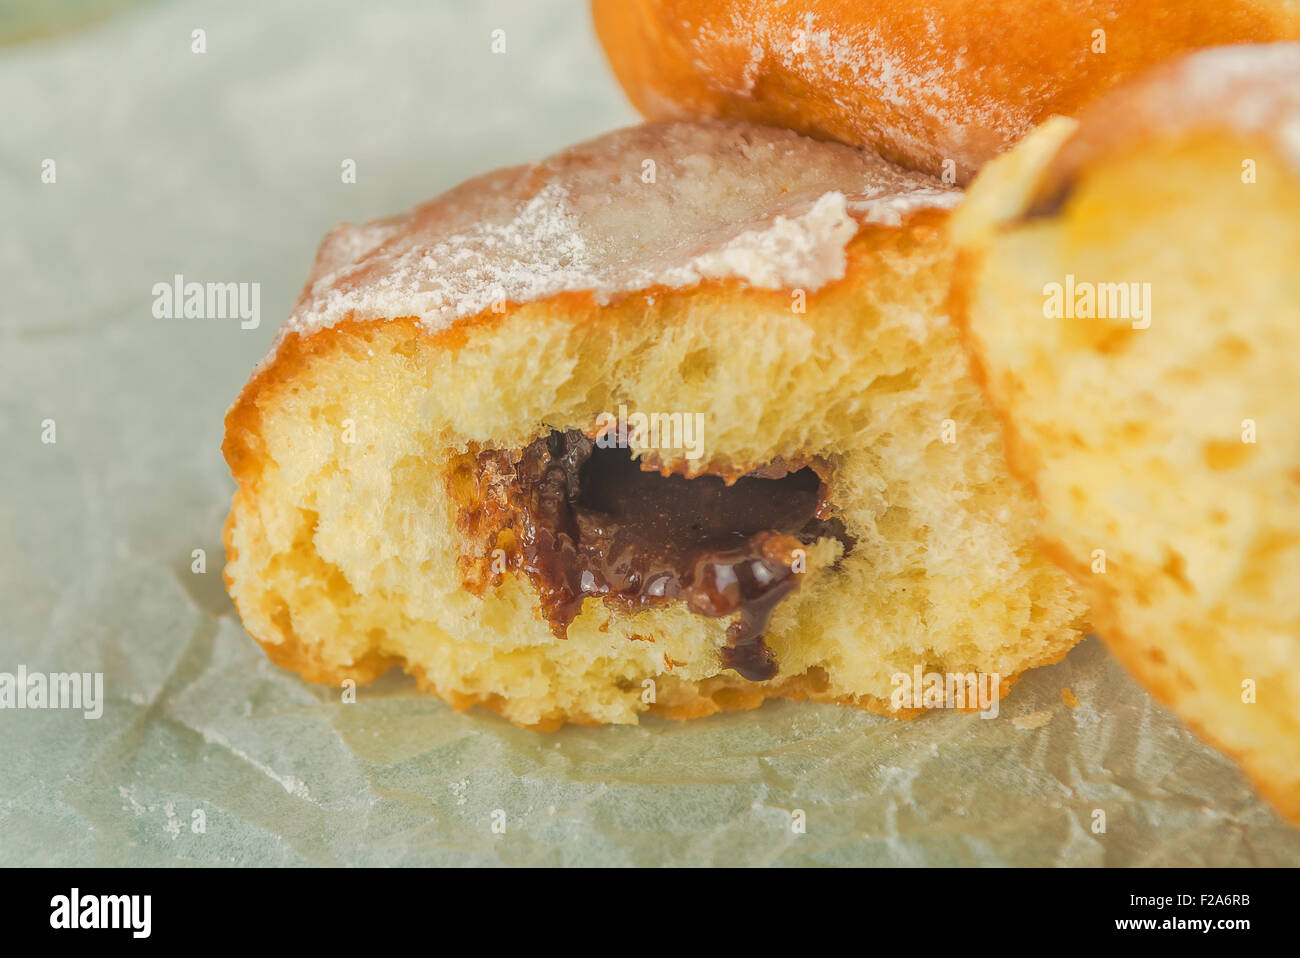 Sweet sugary donuts filled with chocolate cream on rustic wooden kitchen table, tasty bakery doughnuts, selective focus Stock Photo